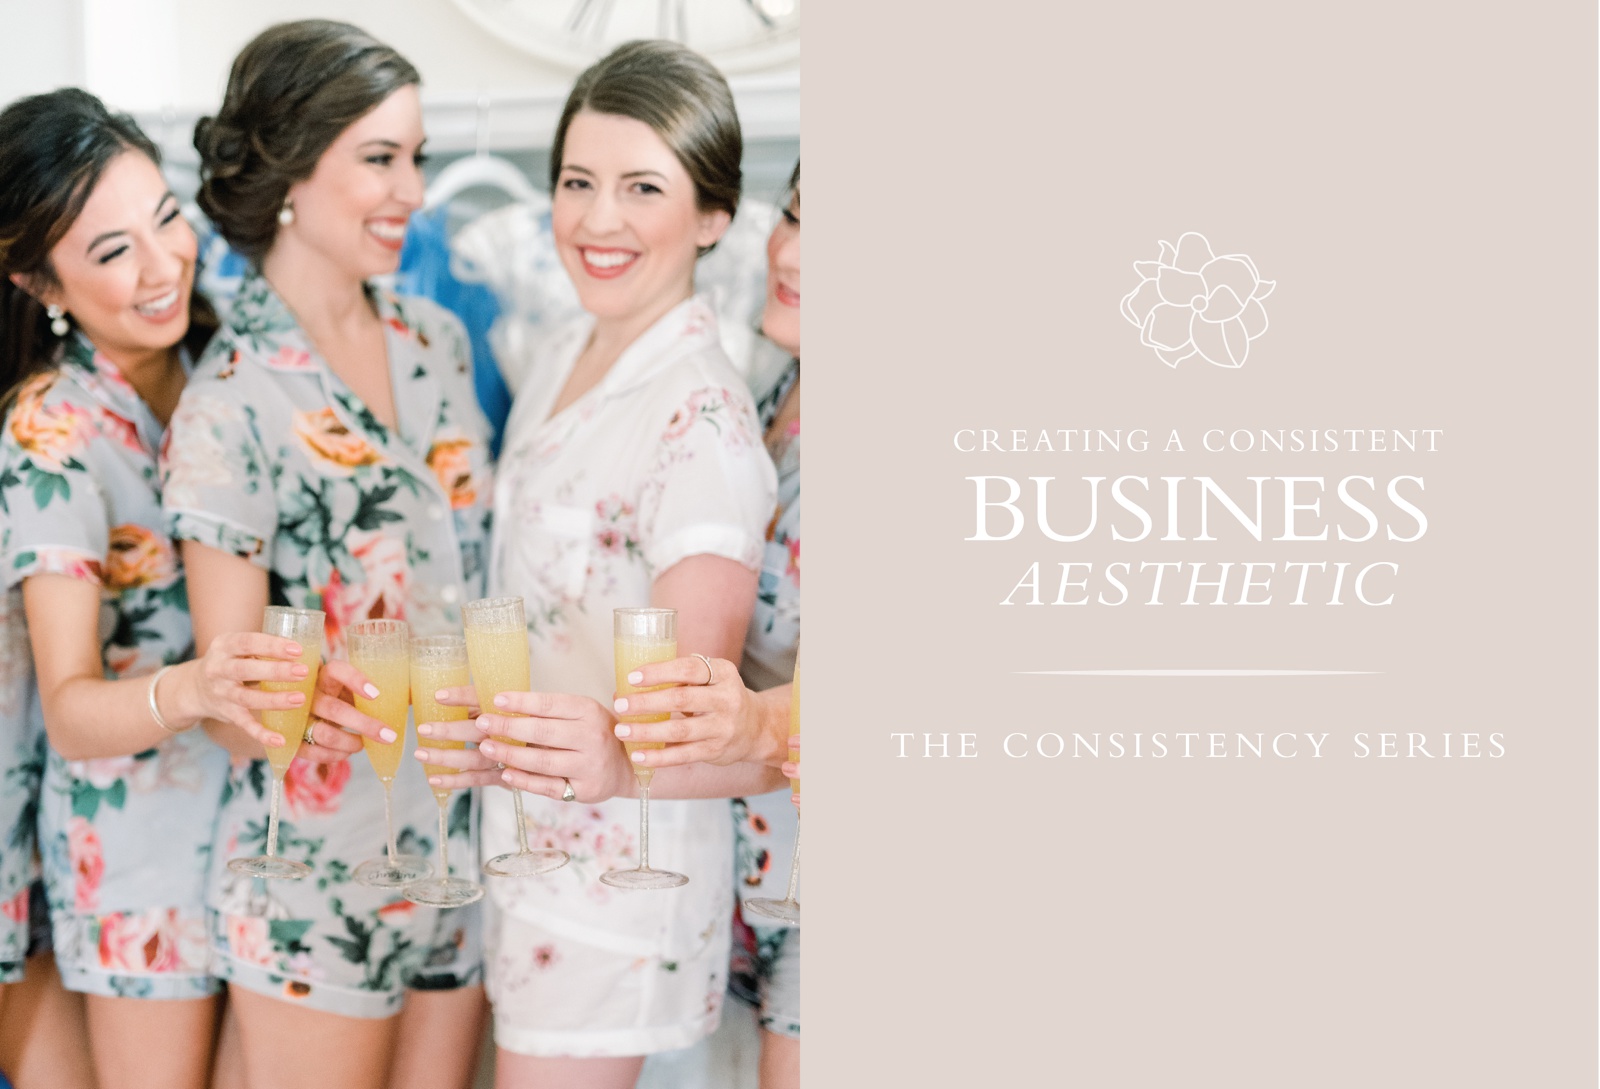 CREATING-A-CONSISTENT-BUSINESS-AESTHETIC-FOR-SMALL-BUSINESS-OWNERS-WEDDING-PHOTOGRAPHY-PHOTO_3952.jpg